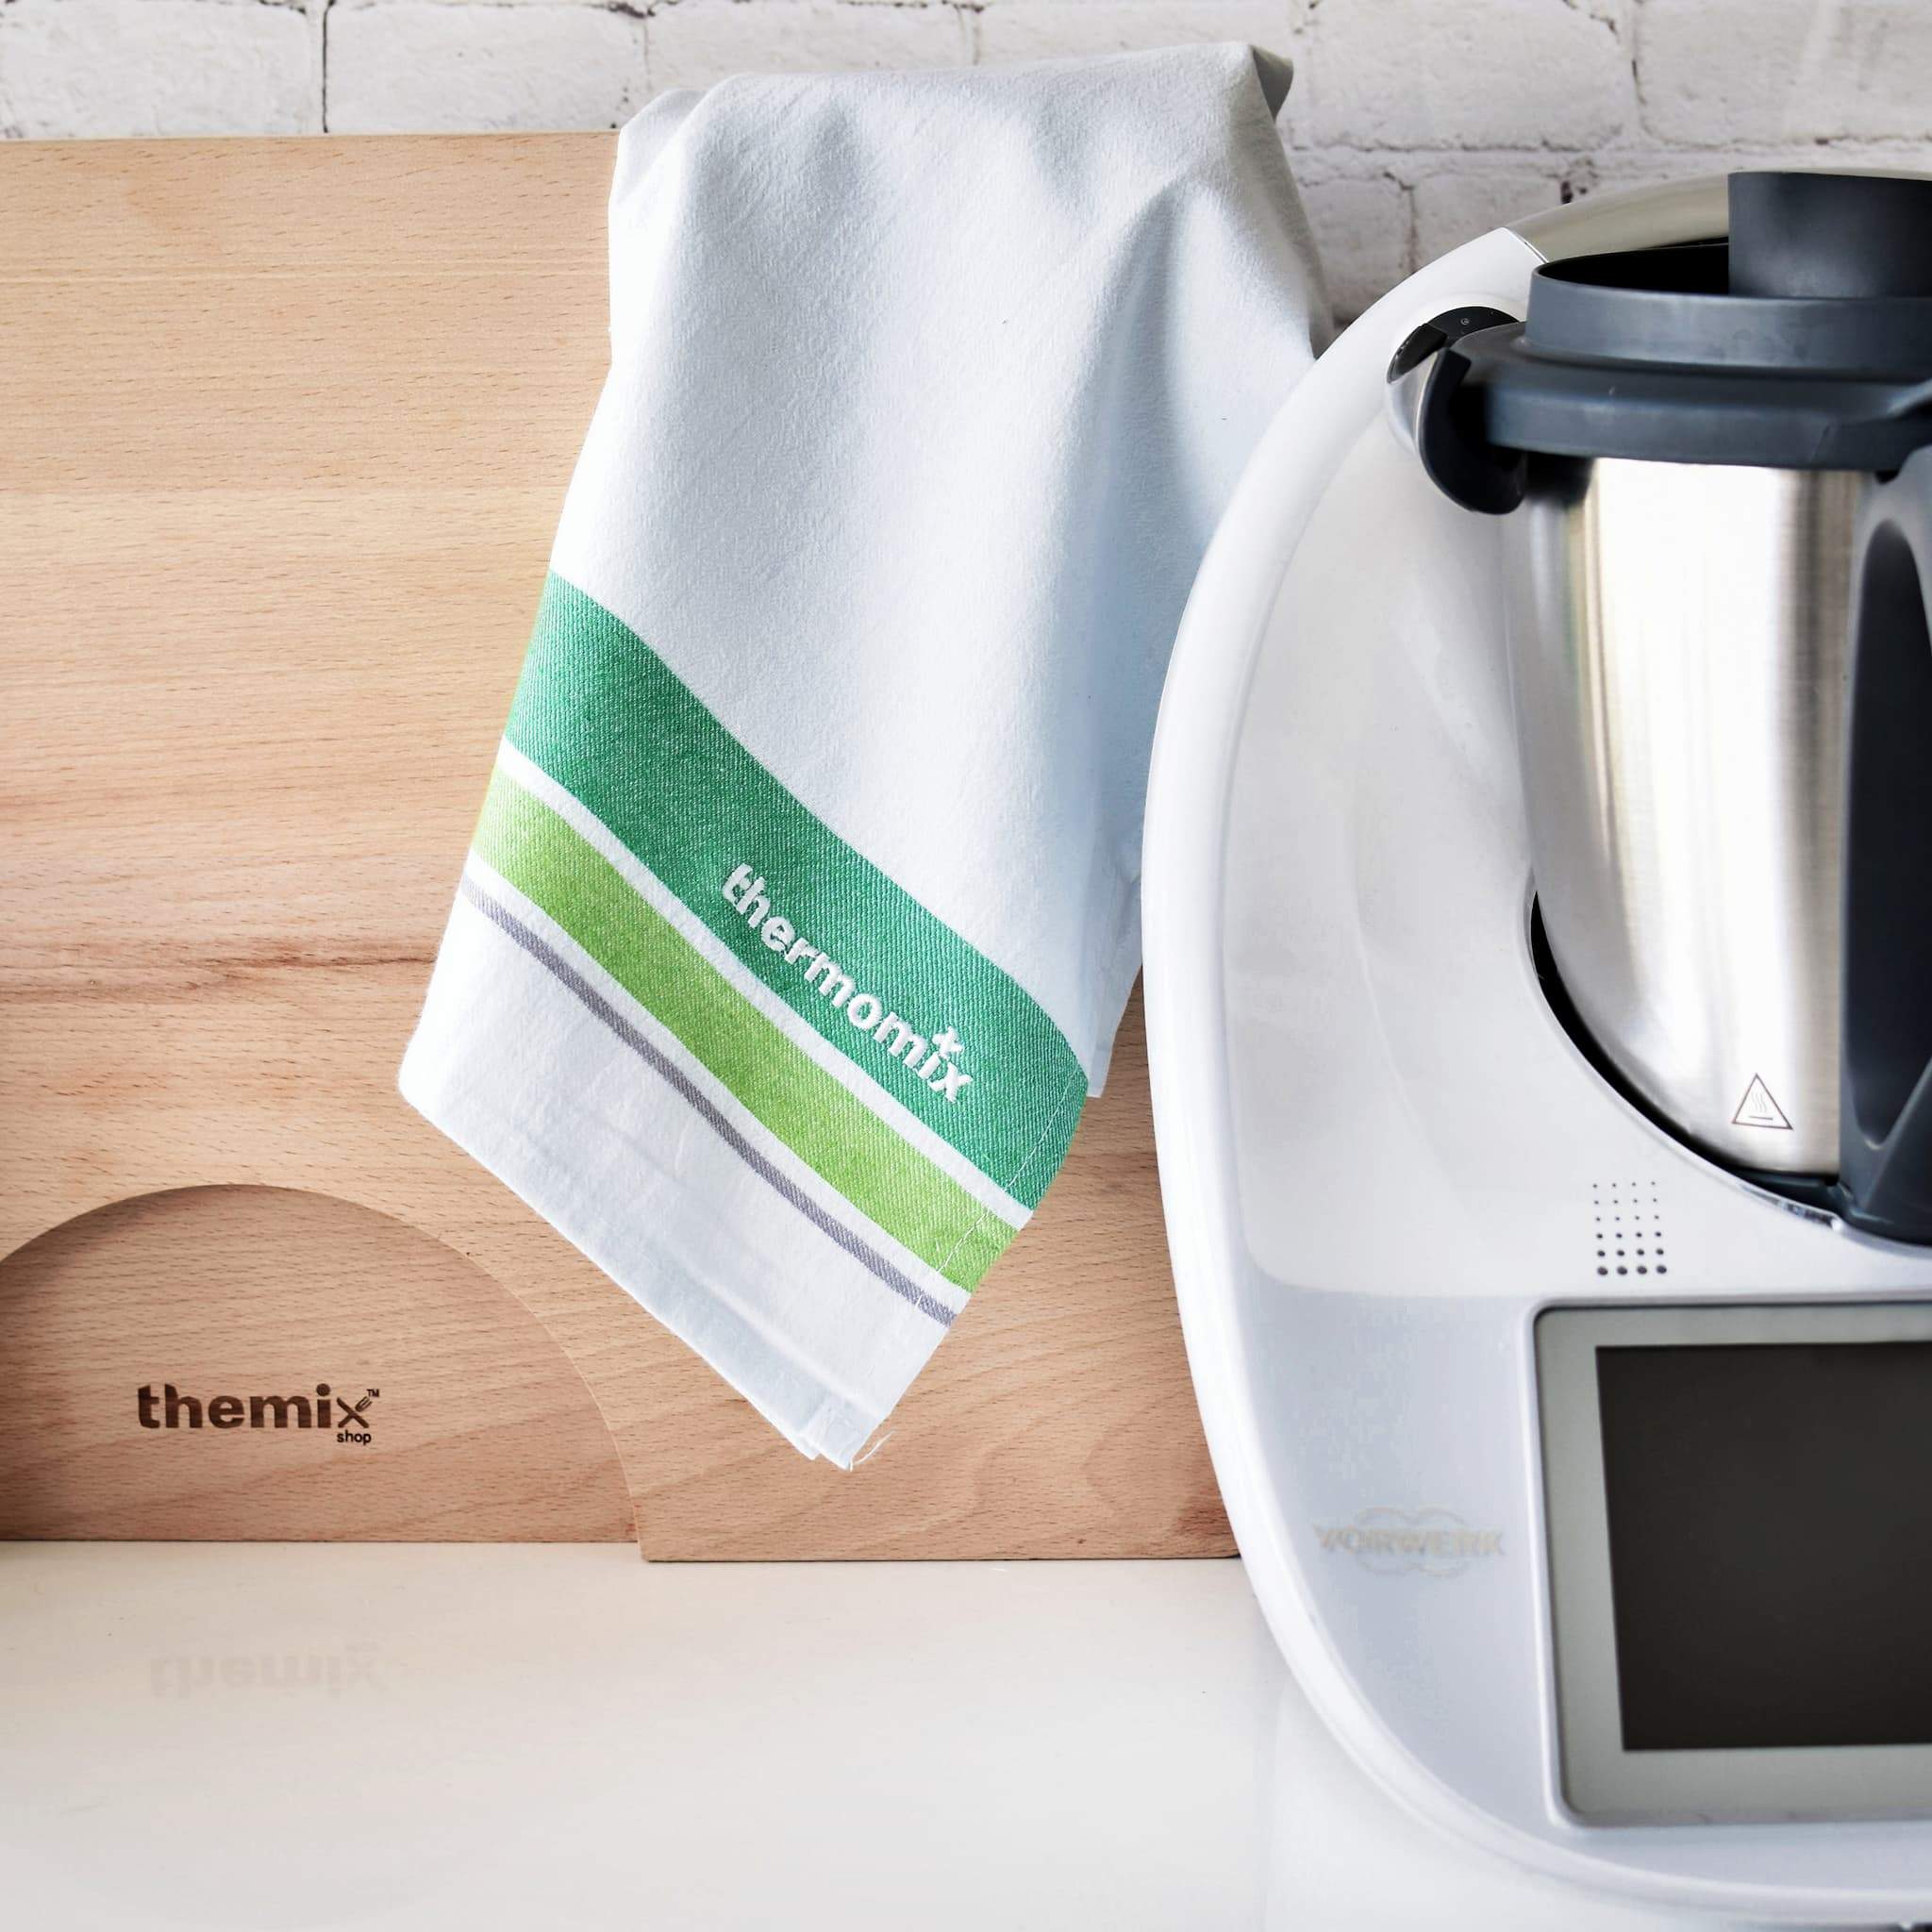 Thermomix-New-Zealand Thermomix Flour Sack Tea Towel Cleaning